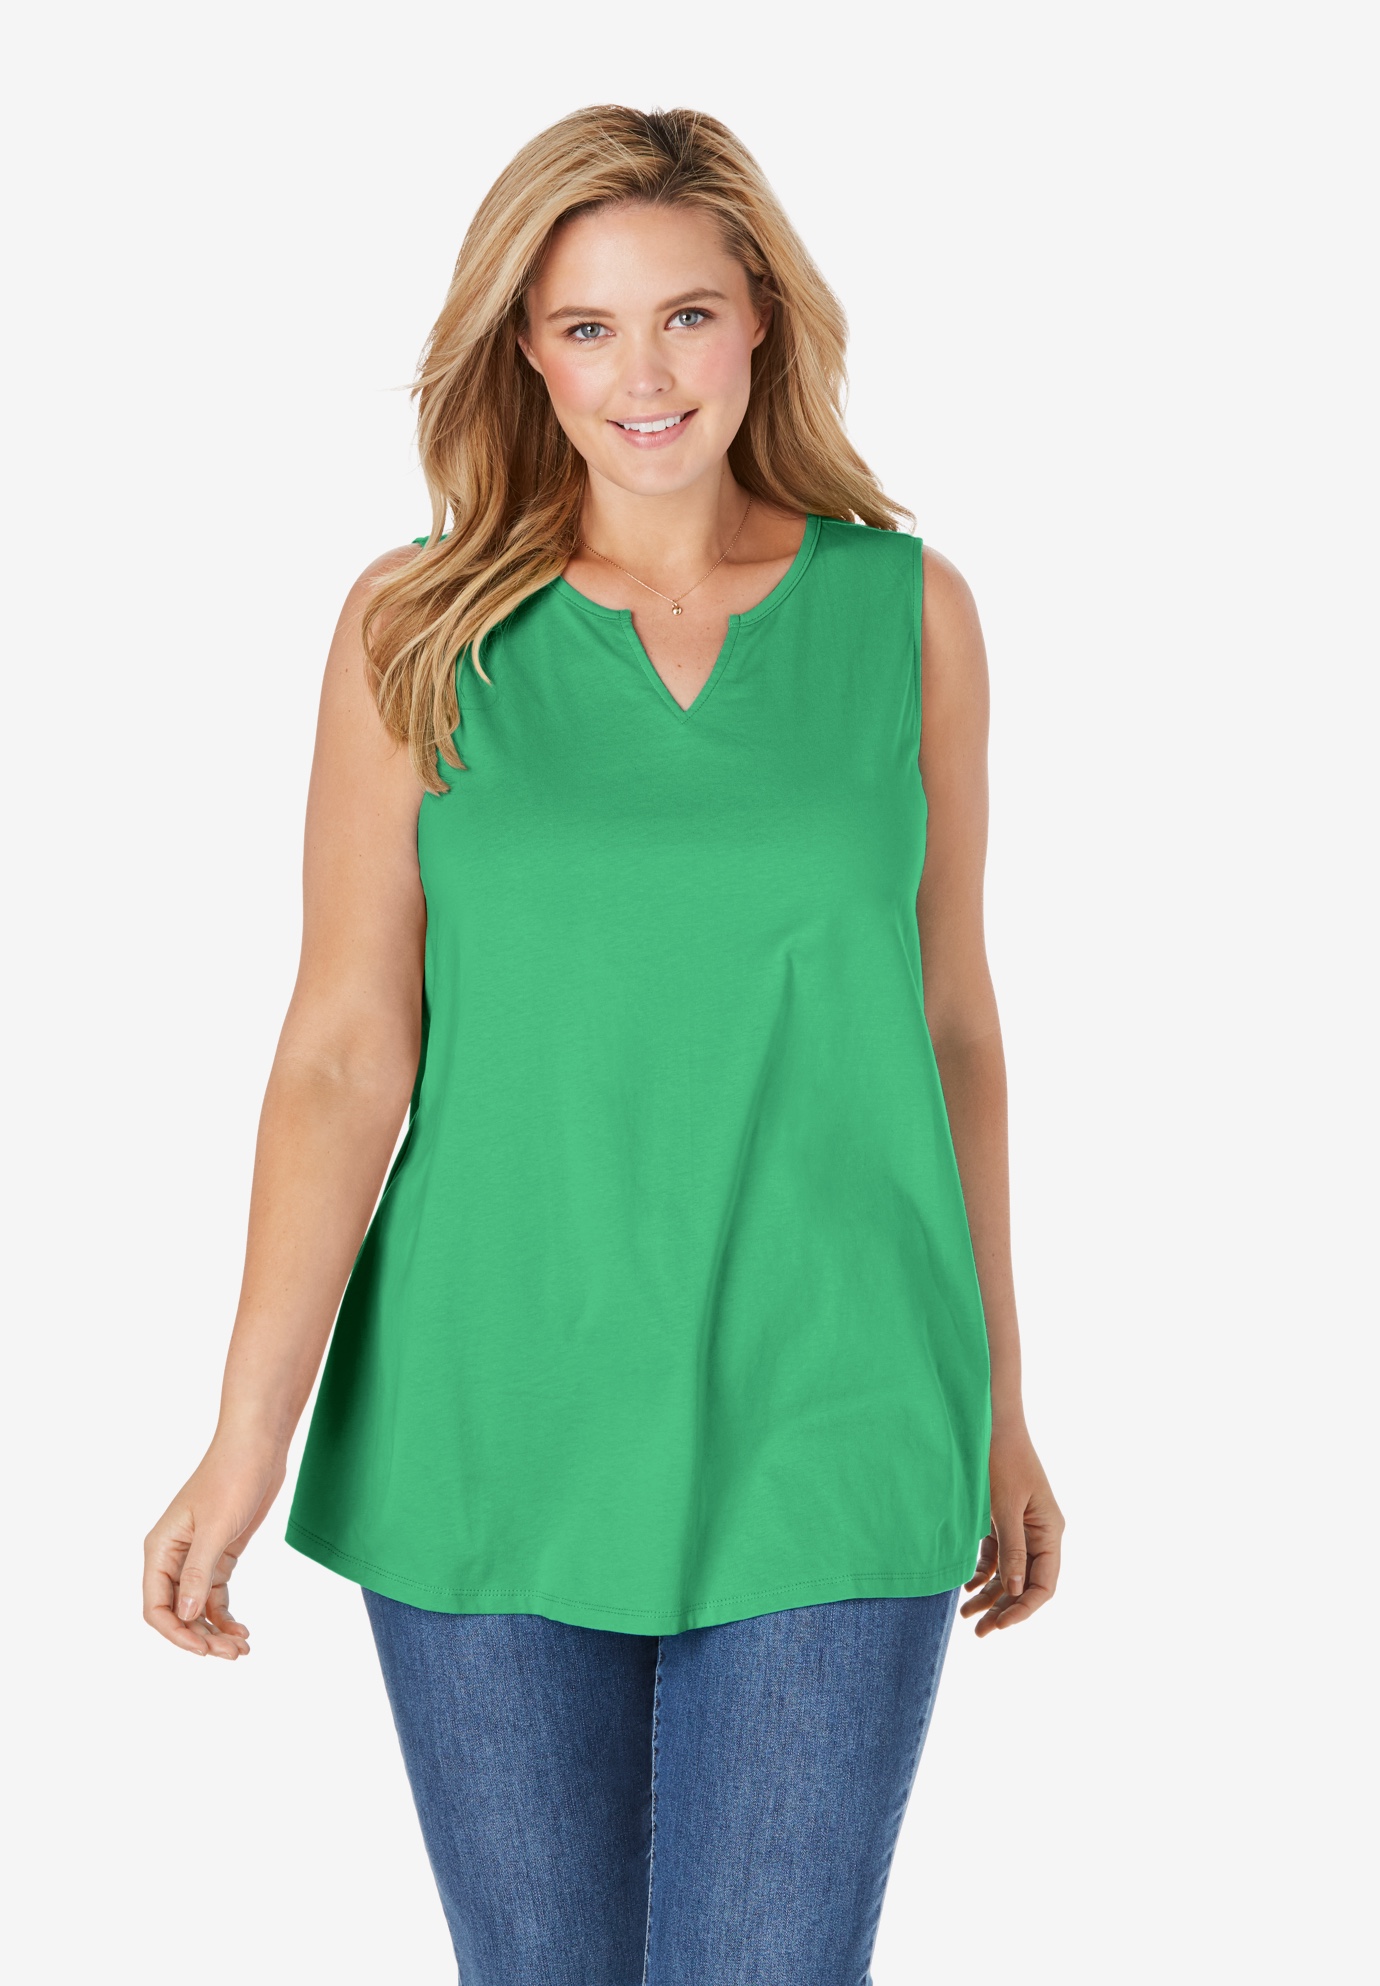 Notch Neck Tank Top| Plus Size Tank Tops | Woman Within